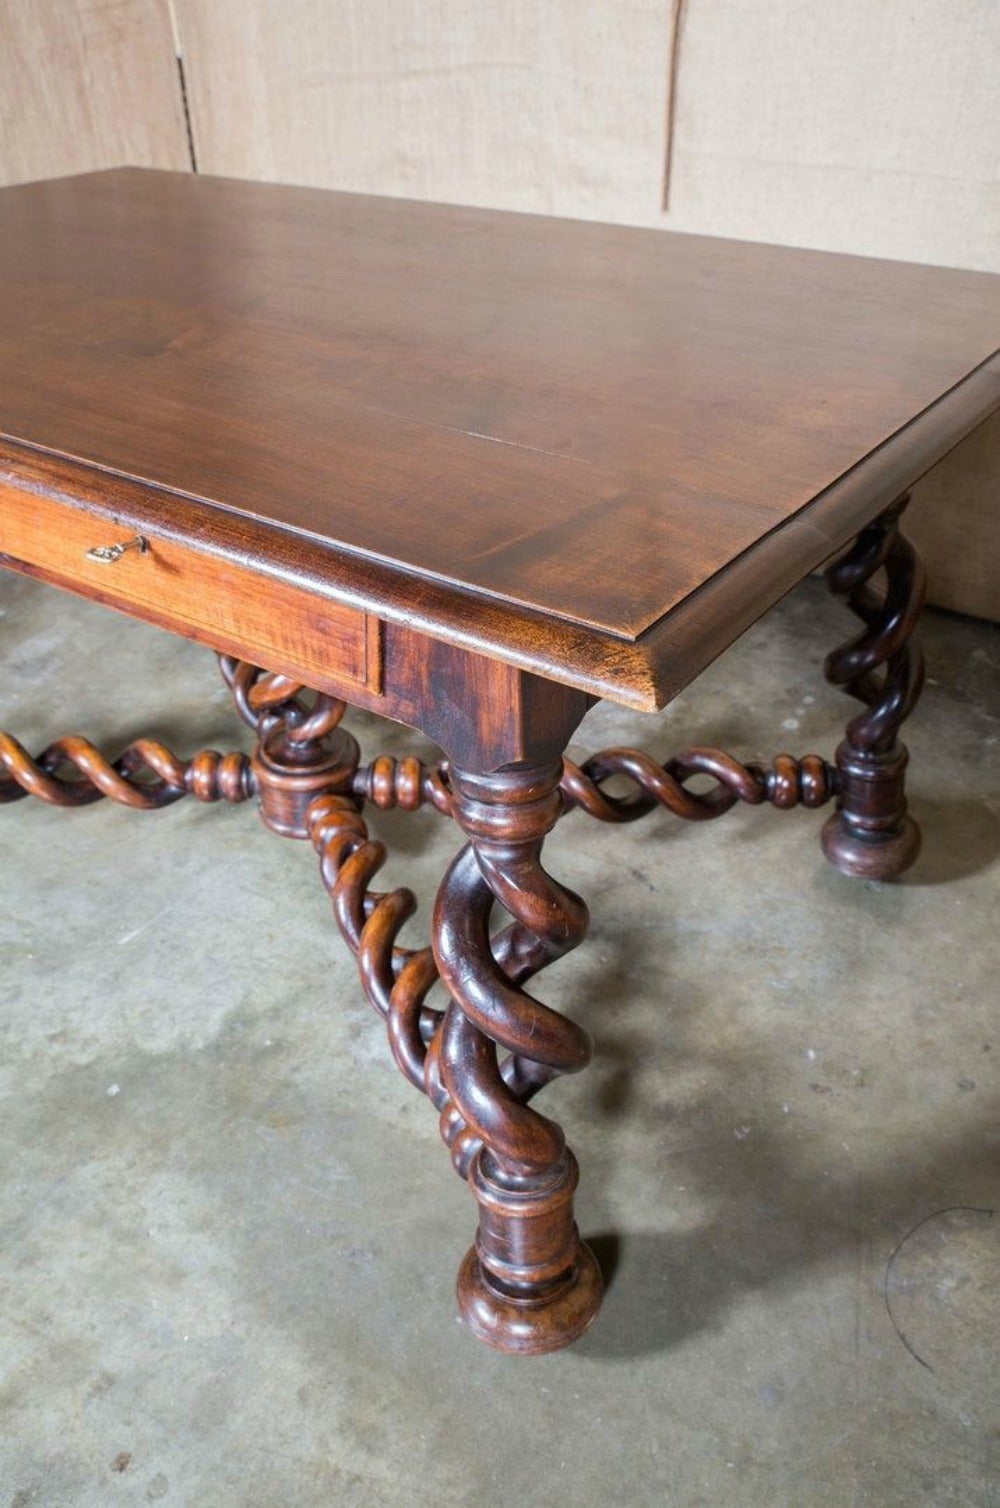 A rare and exquisite Louis XIII style open torsade (barley twist) writing table from the Burgundy region of France. This hand-carved solid walnut desk features a beautiful beveled edge top with a visible yet subtle grain above two drawers resting on